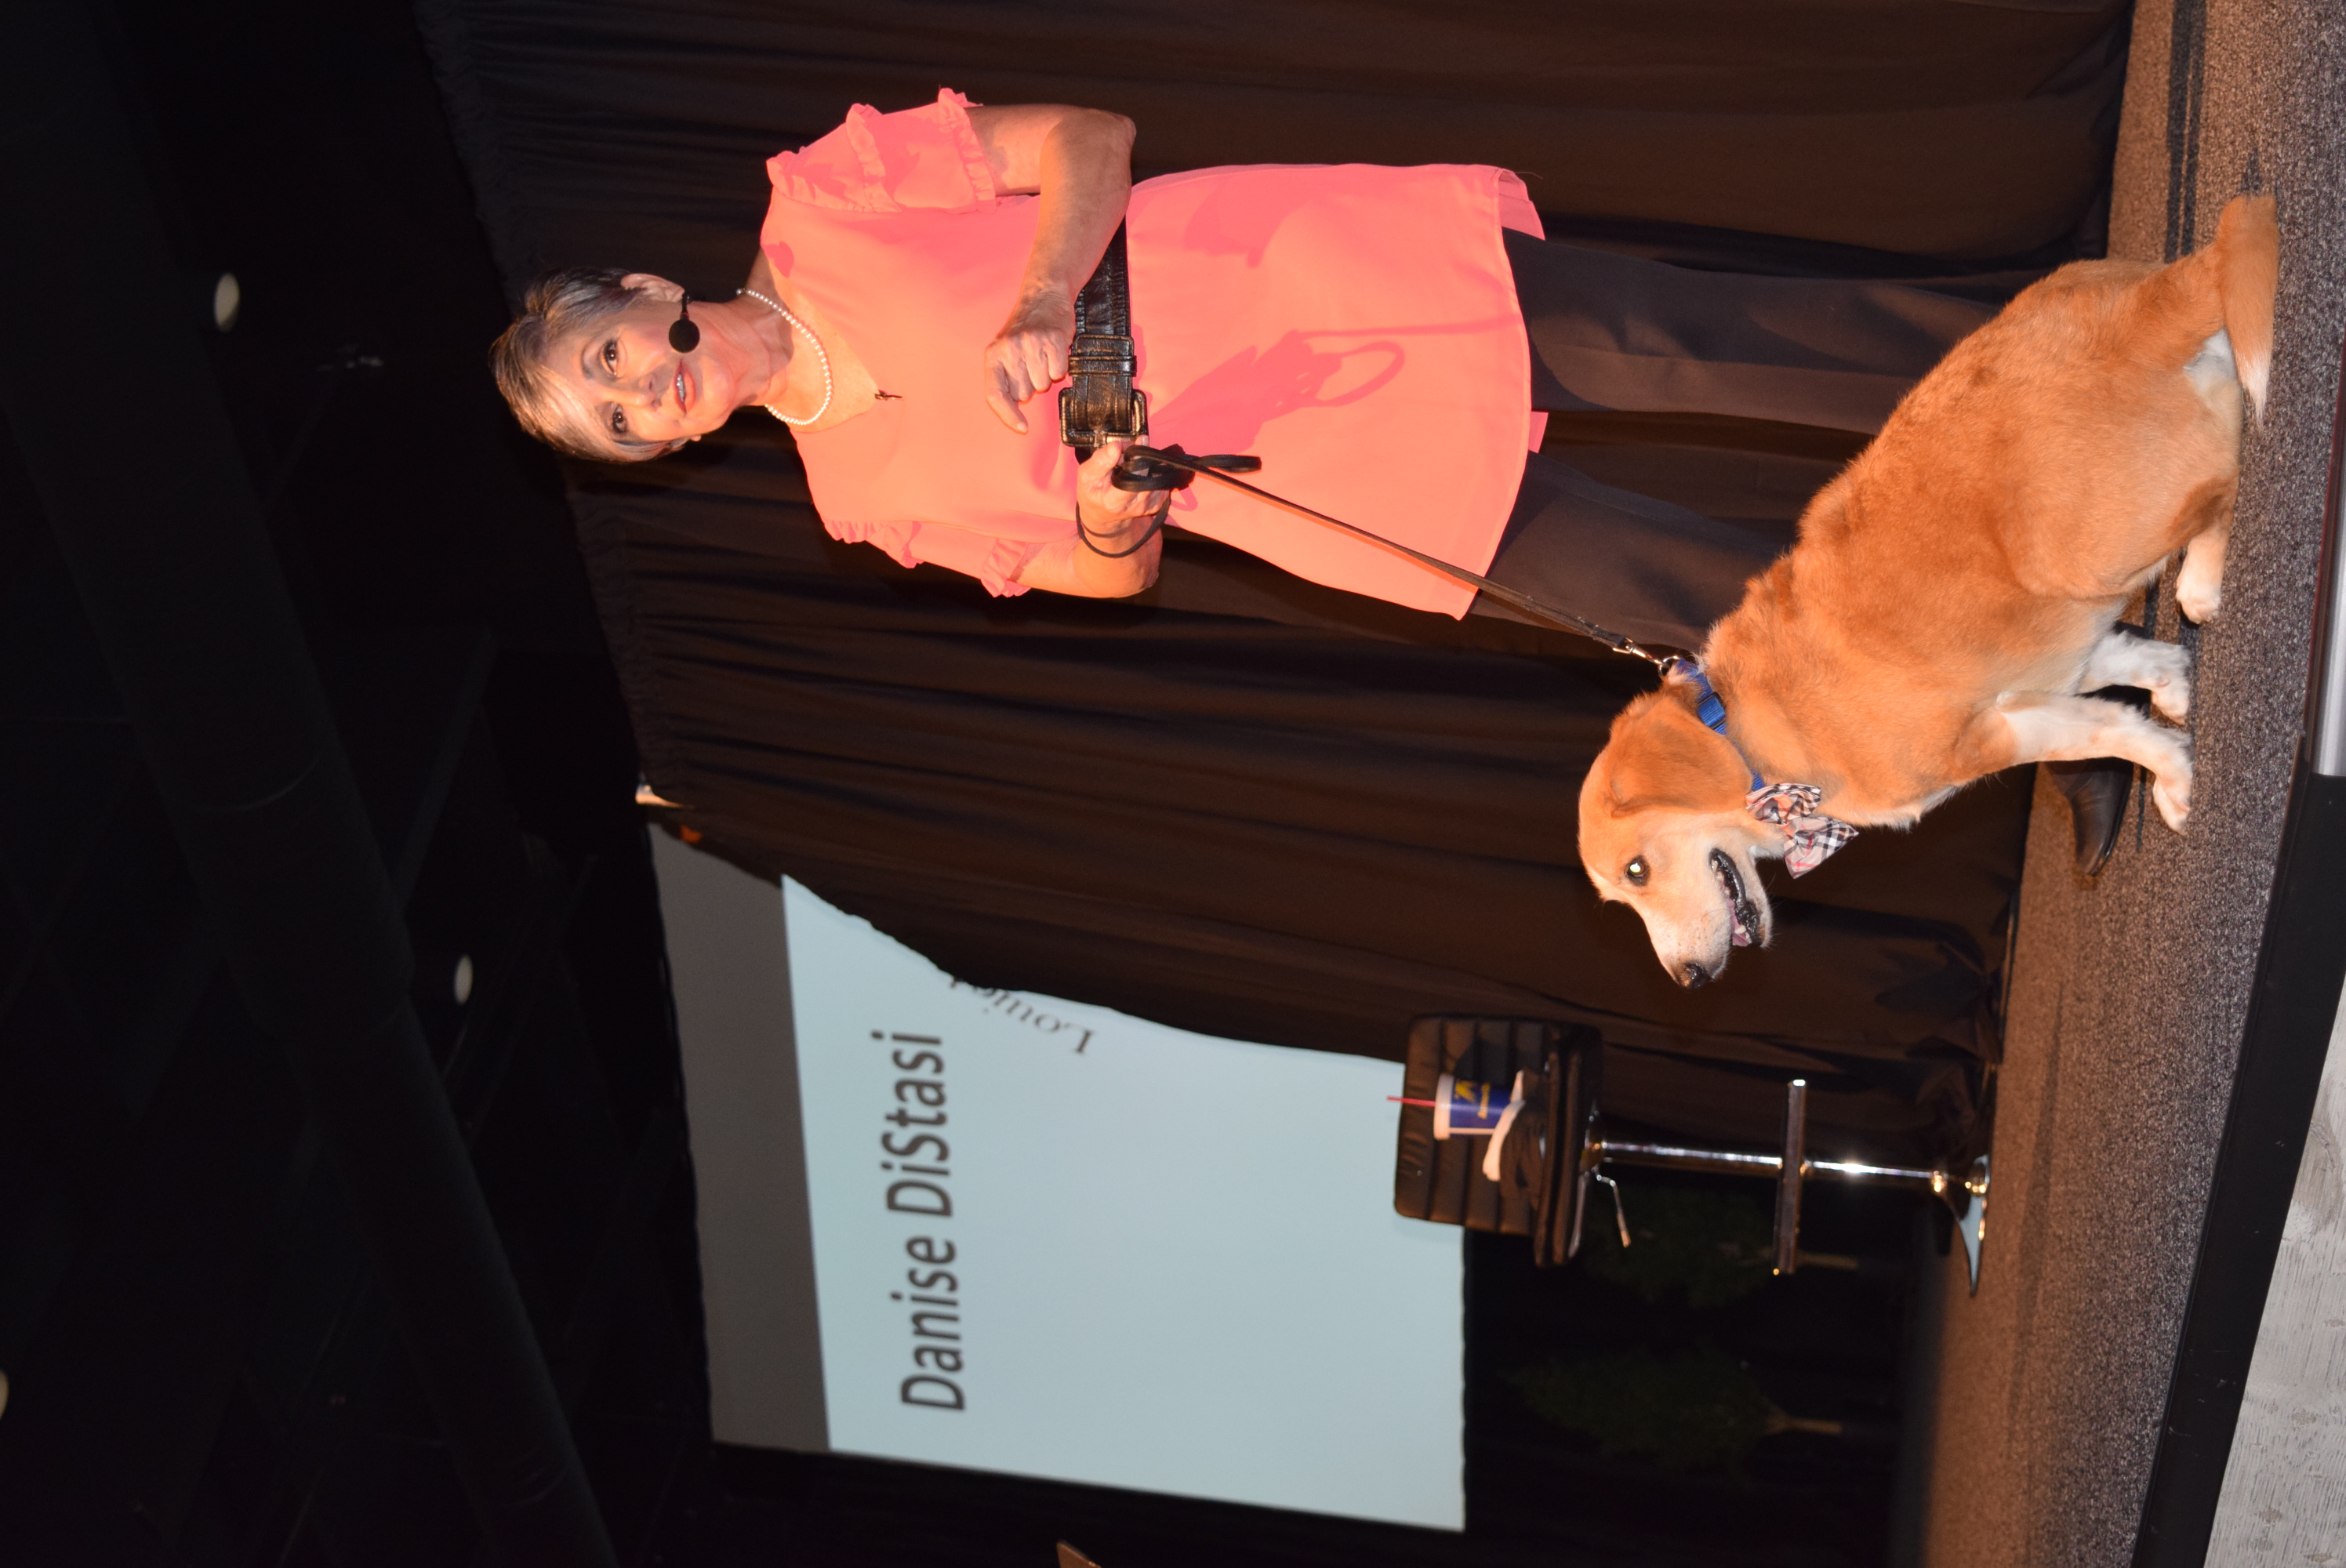 Danise DiStasi of DiStasi Advisors brought her dog, Louie, to the AWOP XL Summit to illustrate how love is at the root of building great leaders. (Oak Tree Communications Photo)